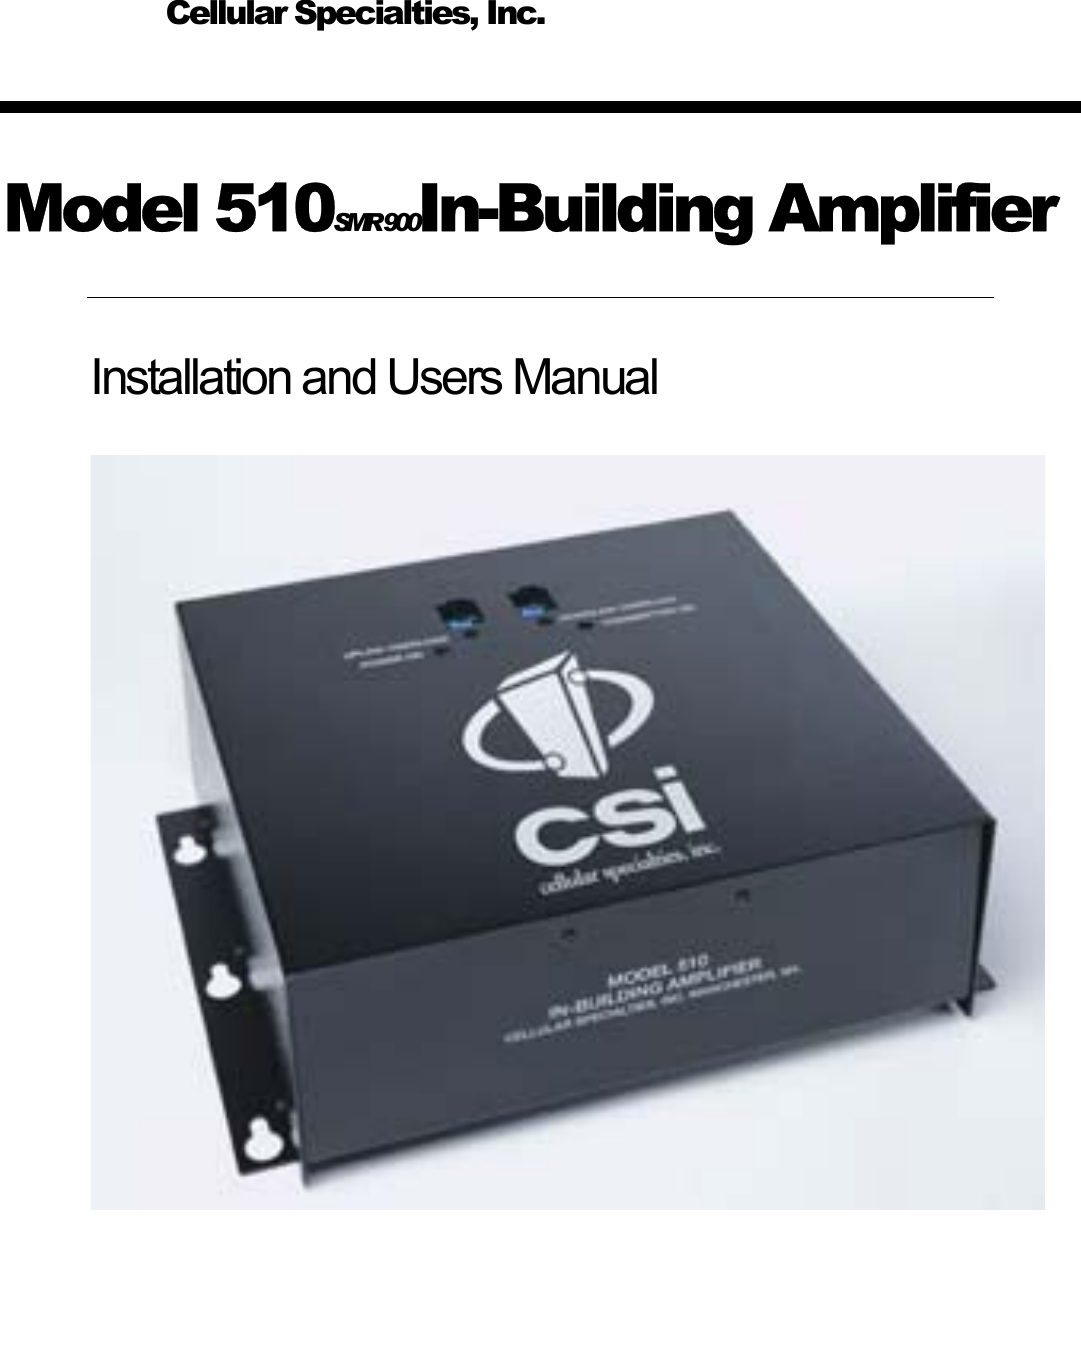     Model 510SMR 900In-Building Amplifier Installation and Users Manual      Cellular Specialties, Inc.  